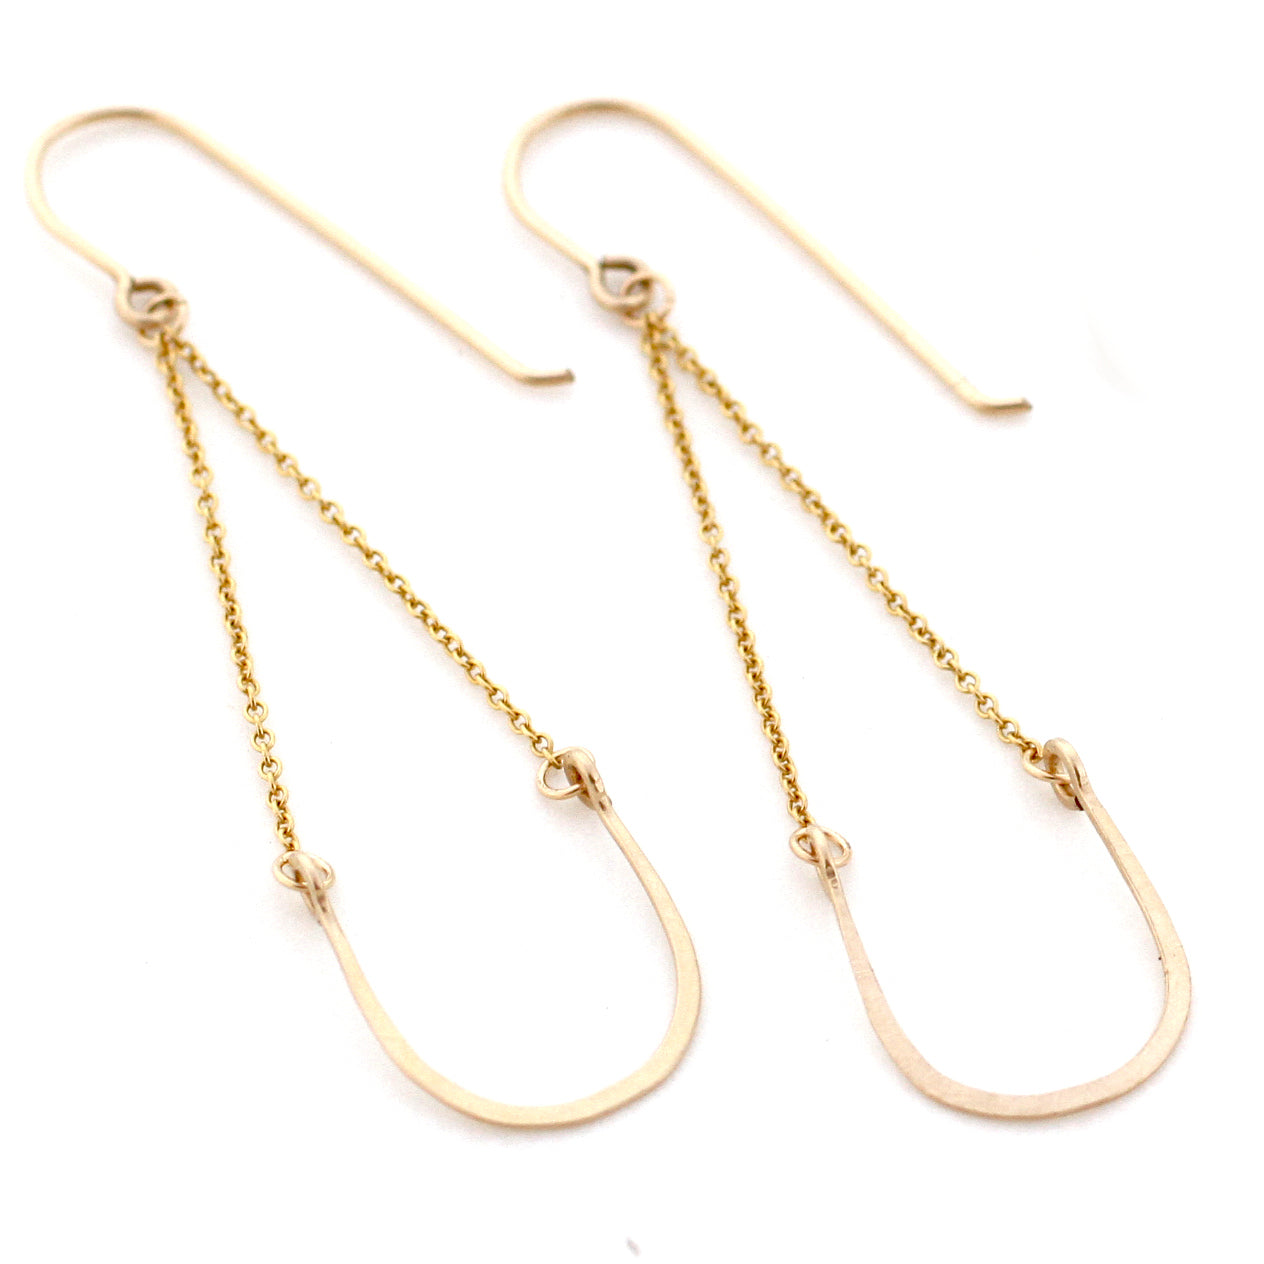 Arch Earrings (Large)